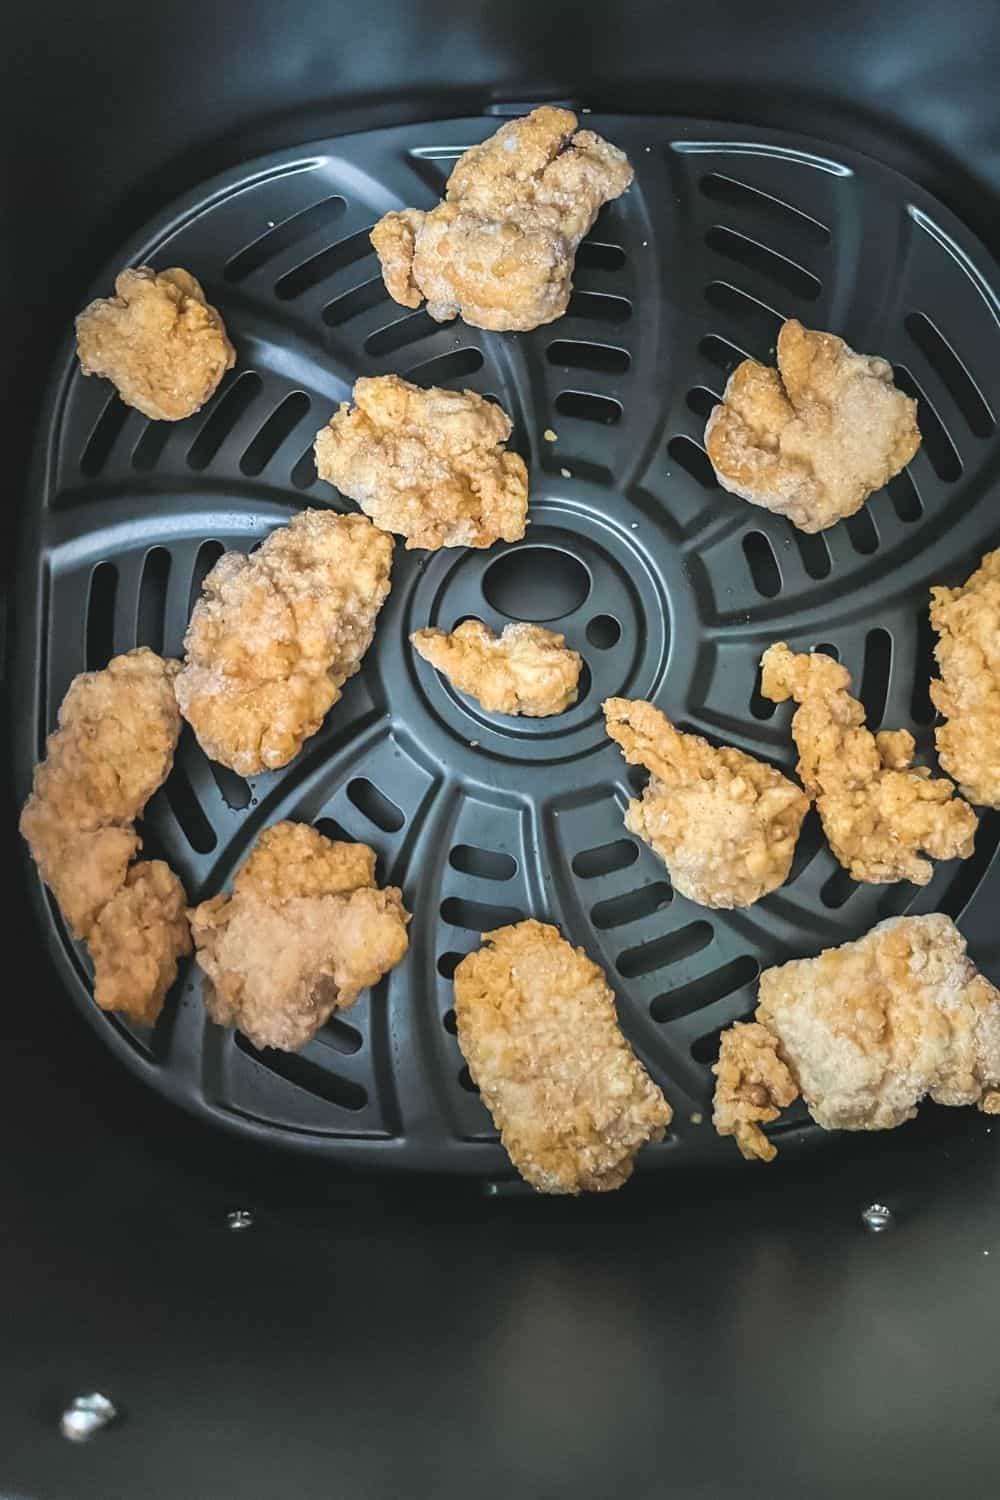 frozen chicken nuggets in the air fryer basket, ready to be cooked